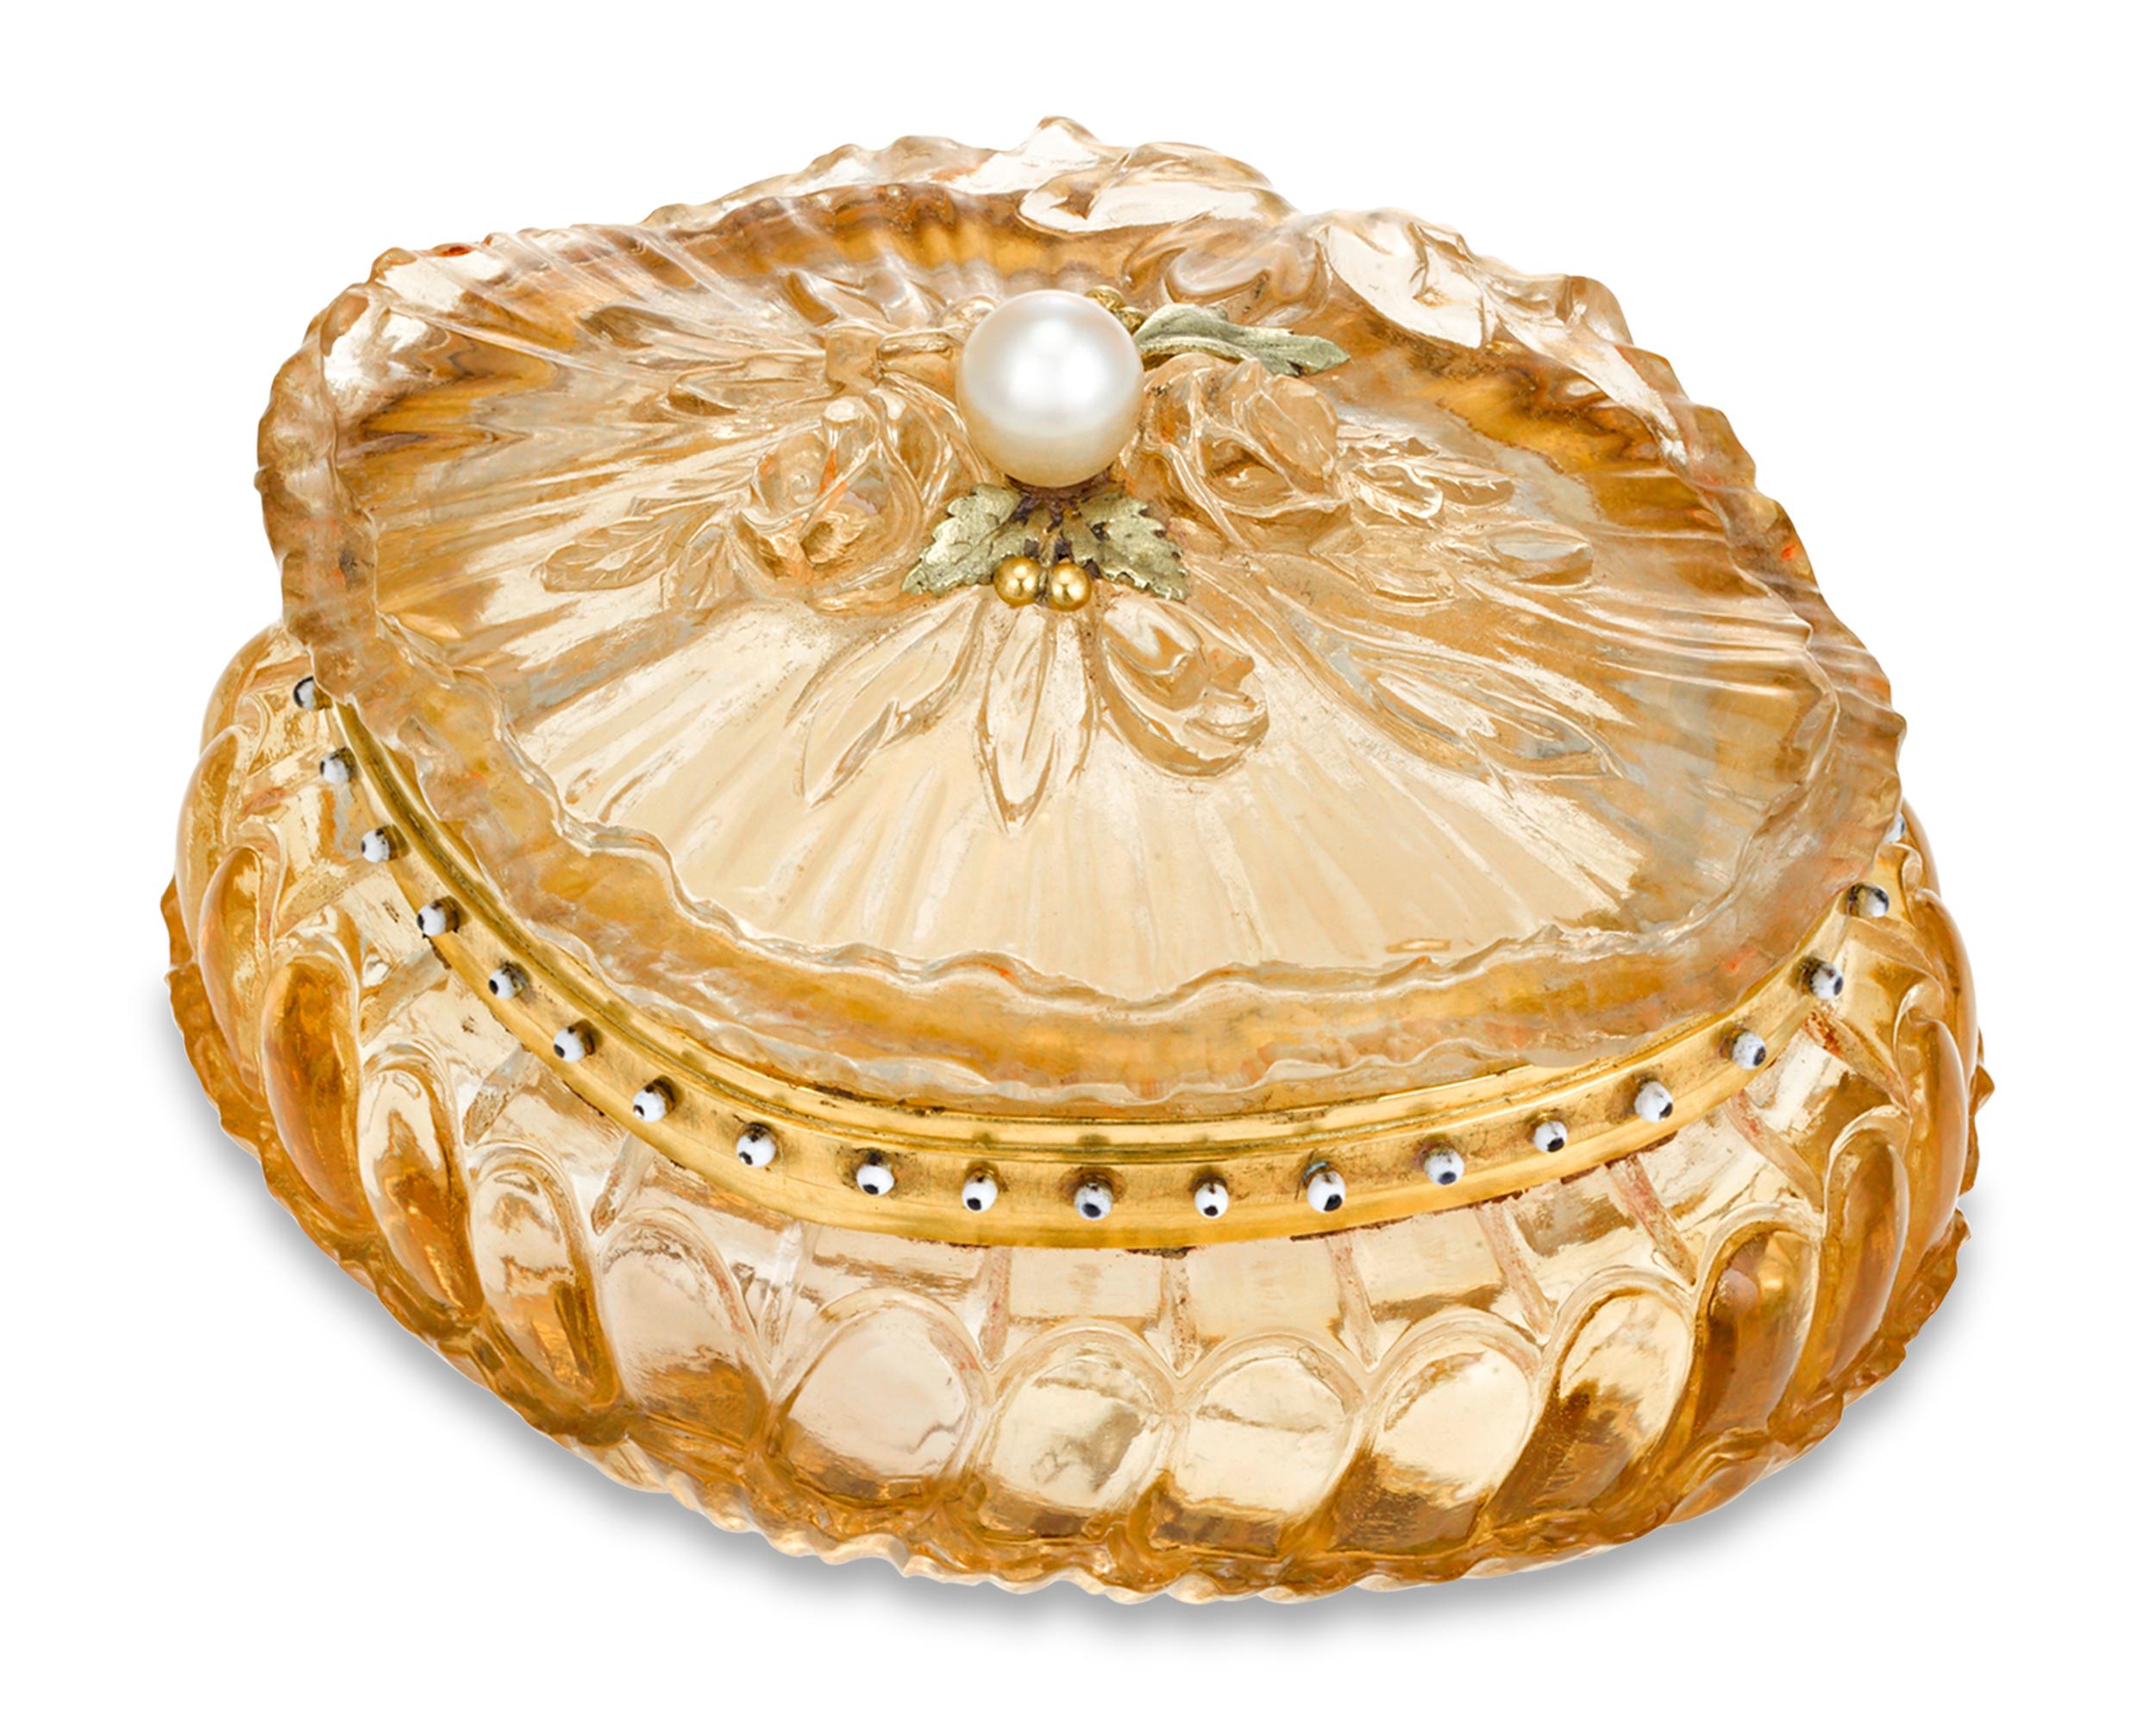 This exquisite French pill box combines the mastery of the French goldsmithing tradition with the radiance of citrine. The box was crafted by the celebrated French jeweler Gustave-Roger Sandoz, who was renowned for producing exceptional pieces with